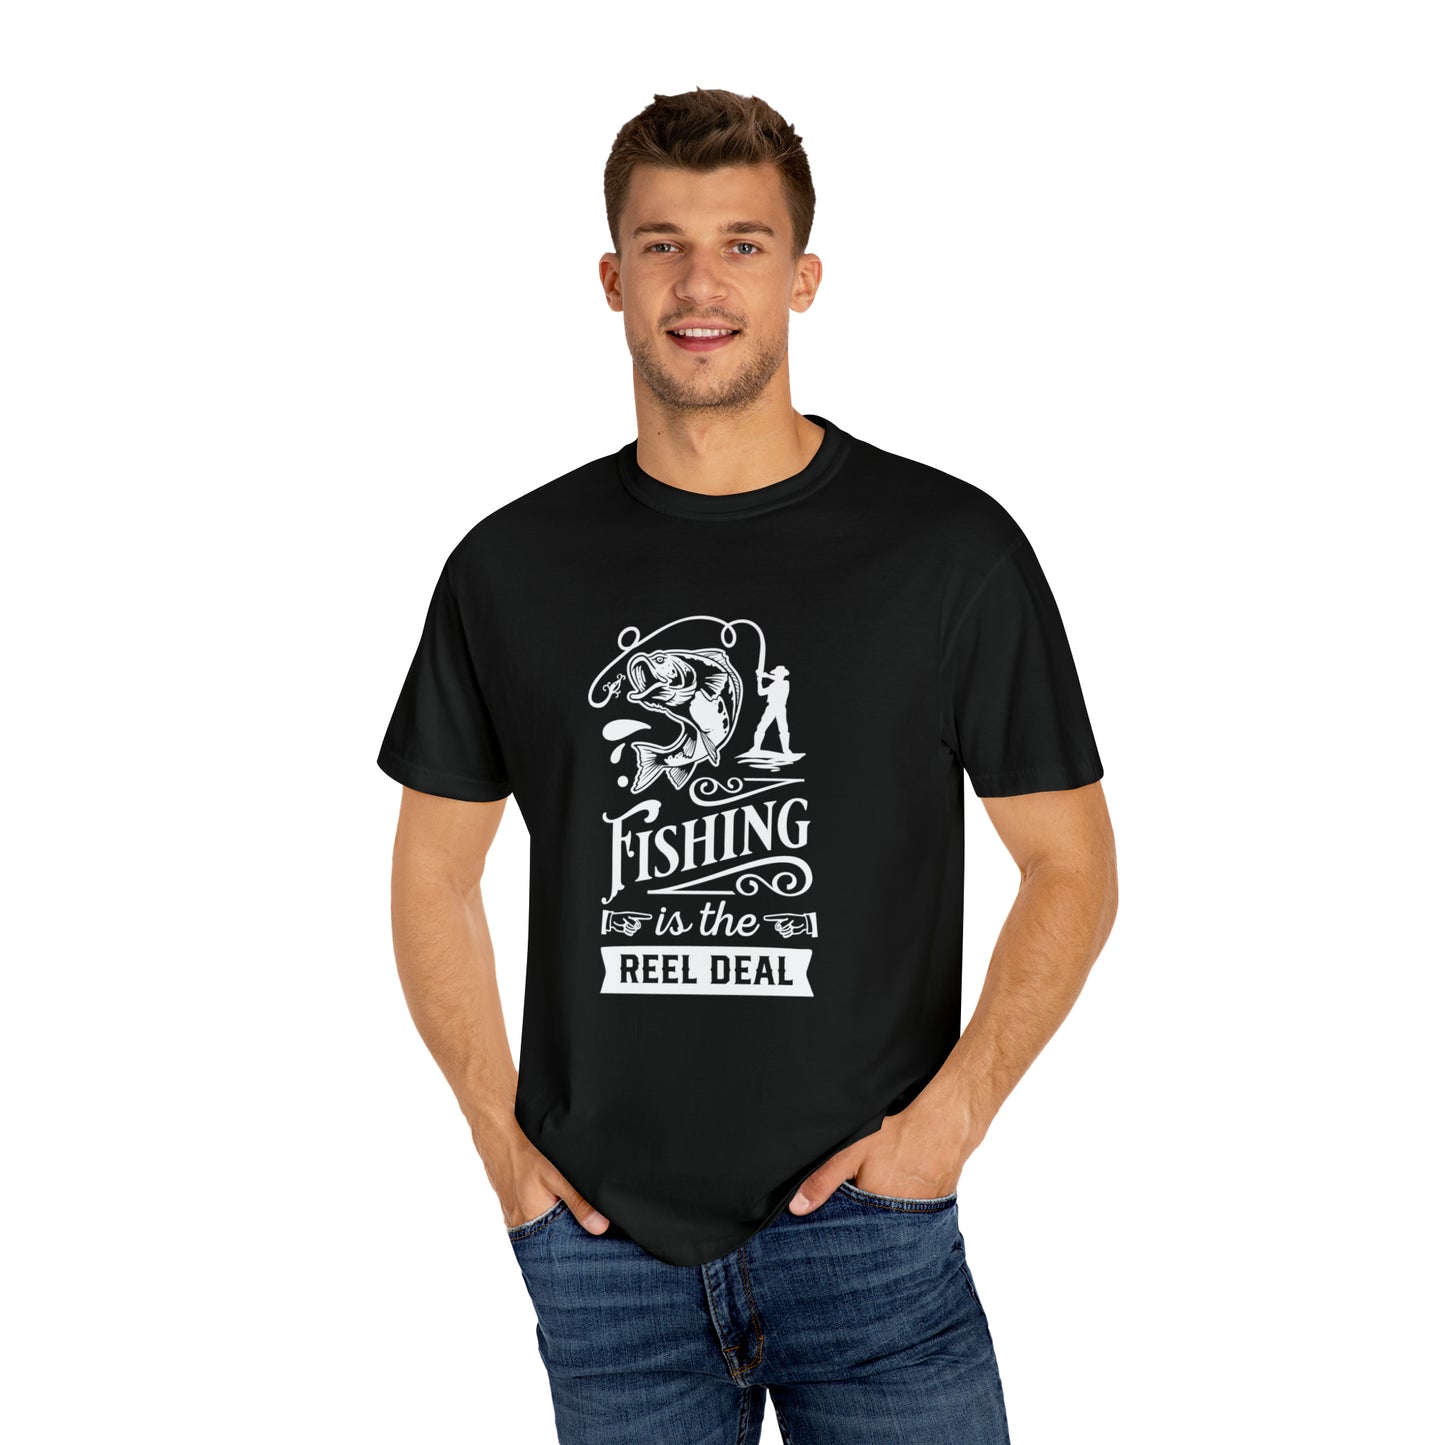 "Fishing Is the Reel Deal" T-Shirt